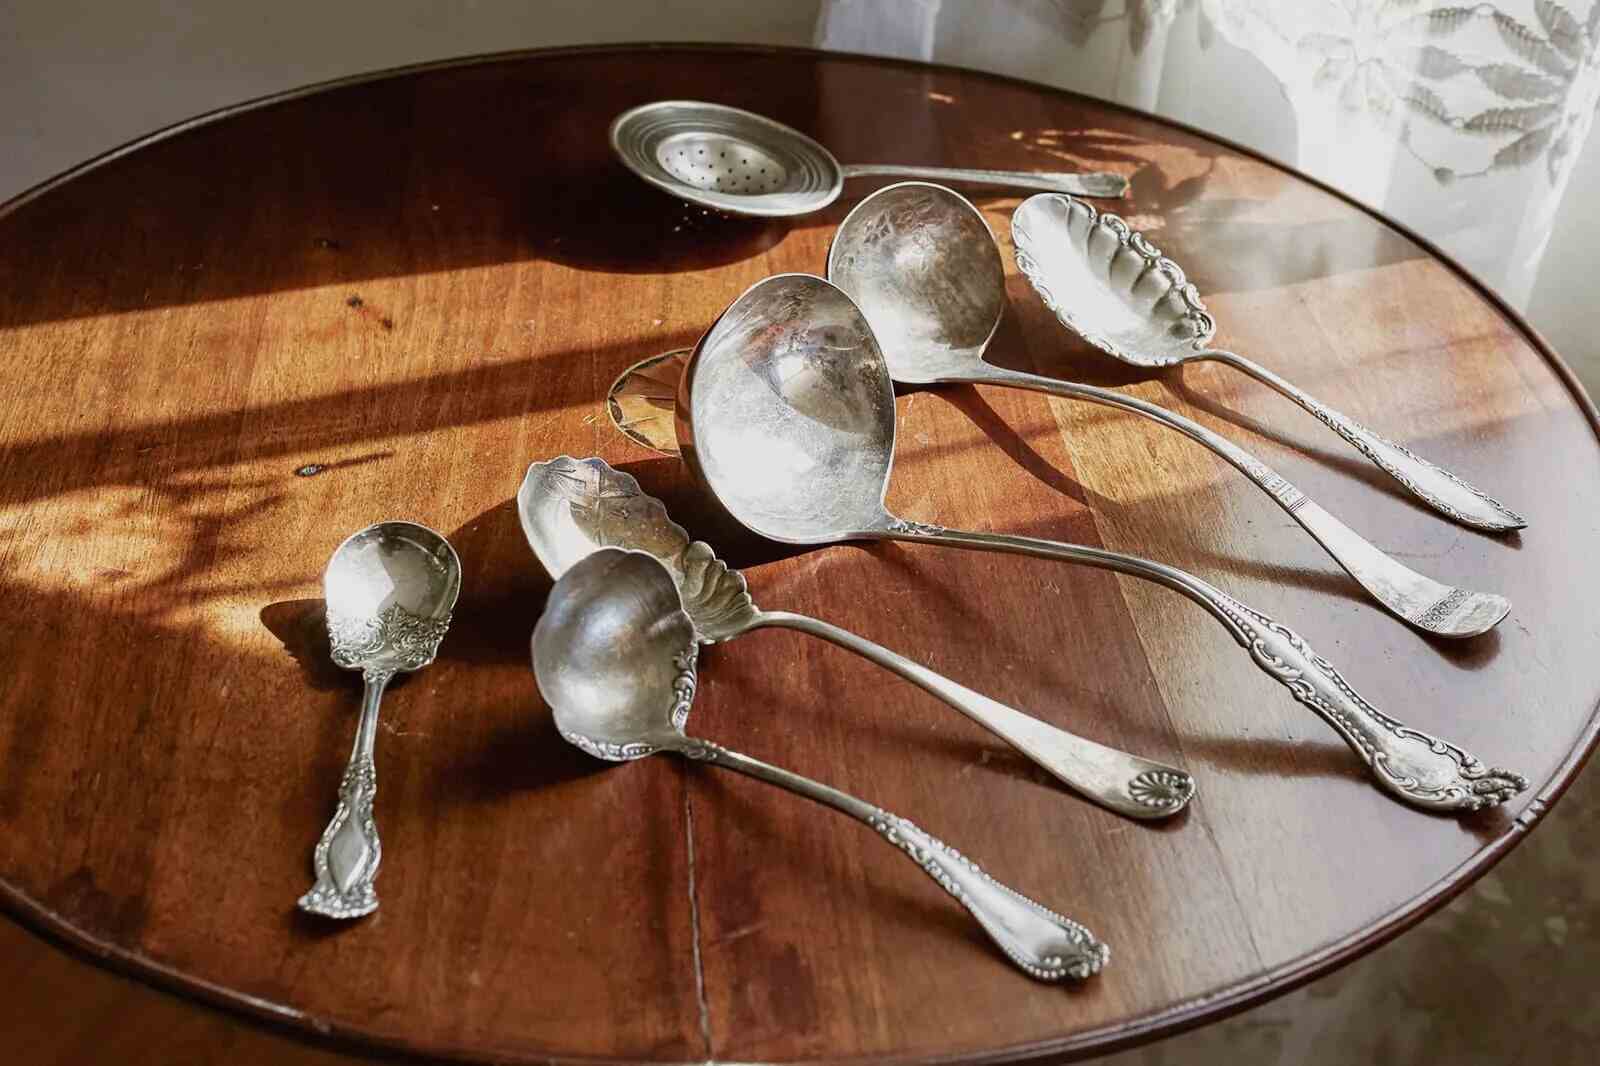 antique Silver Cutlery on a wooden table